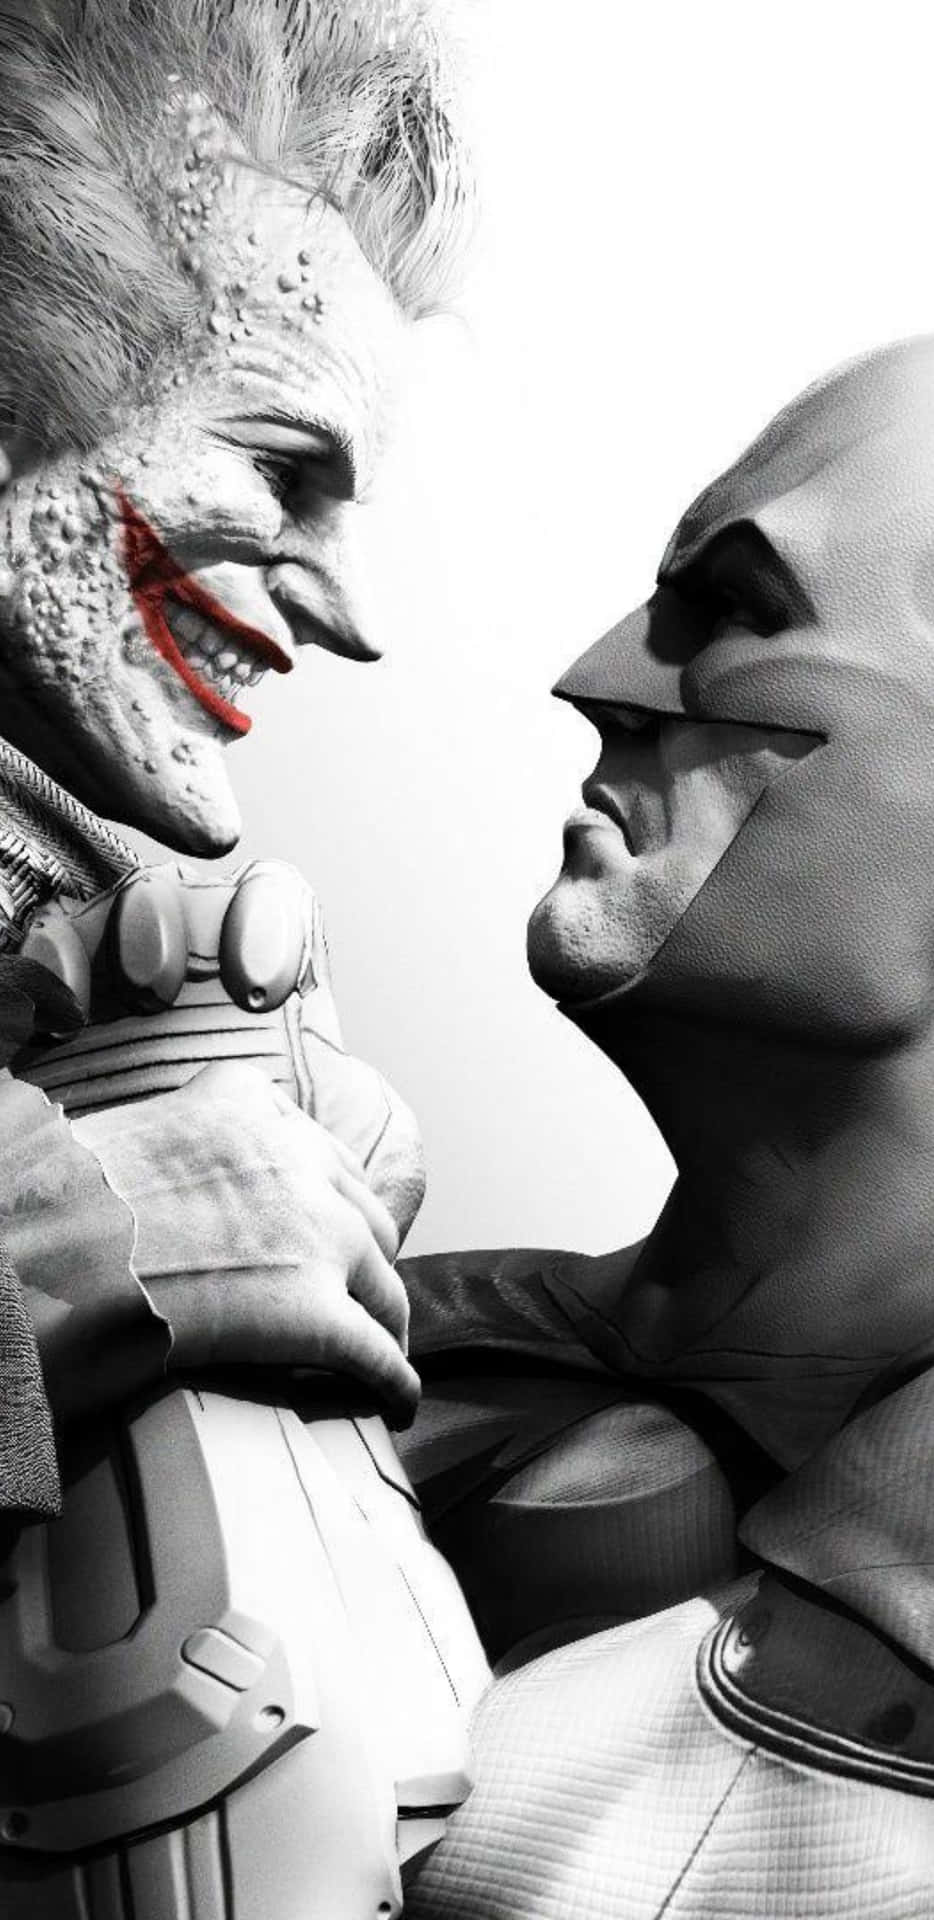 Batman And Joker In A Black And White Image